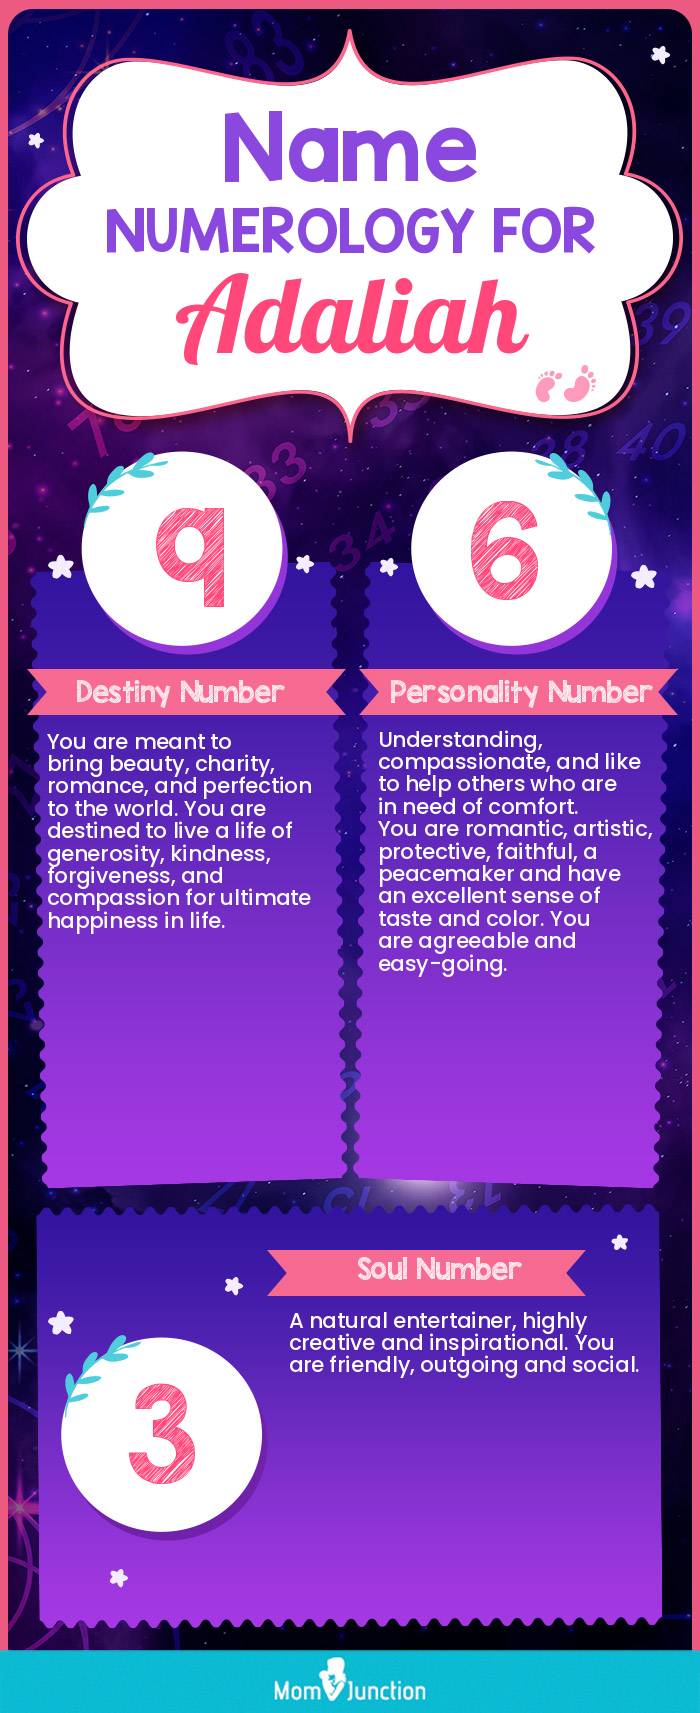 name-numerology-for-adaliah-girl